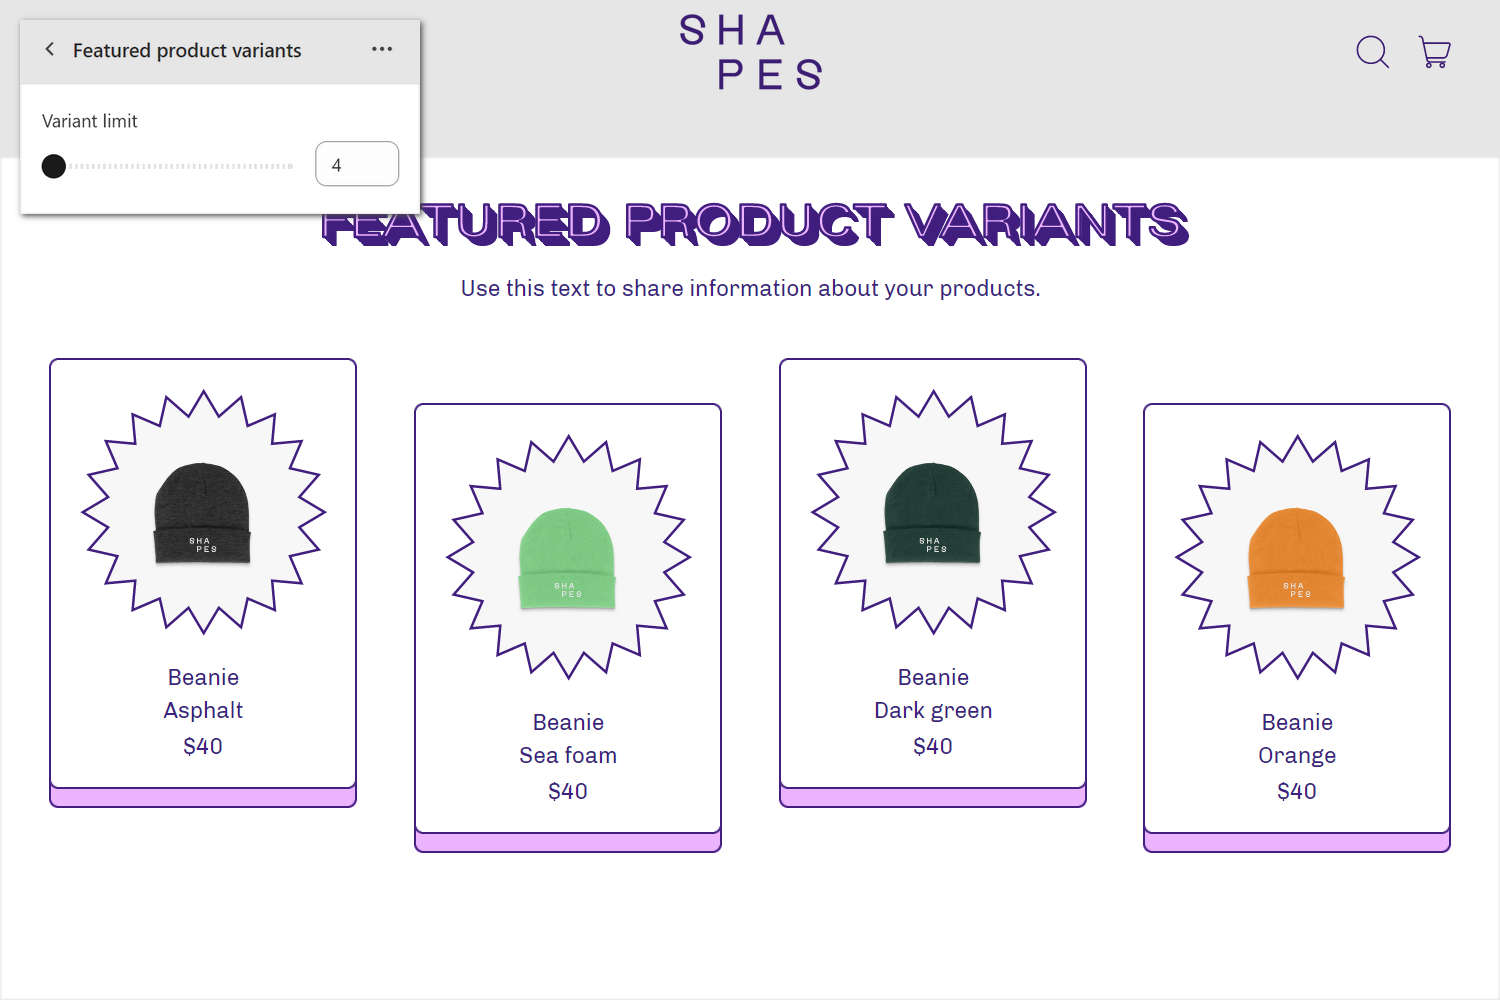 A Featured product variants section on an example store's home page page.